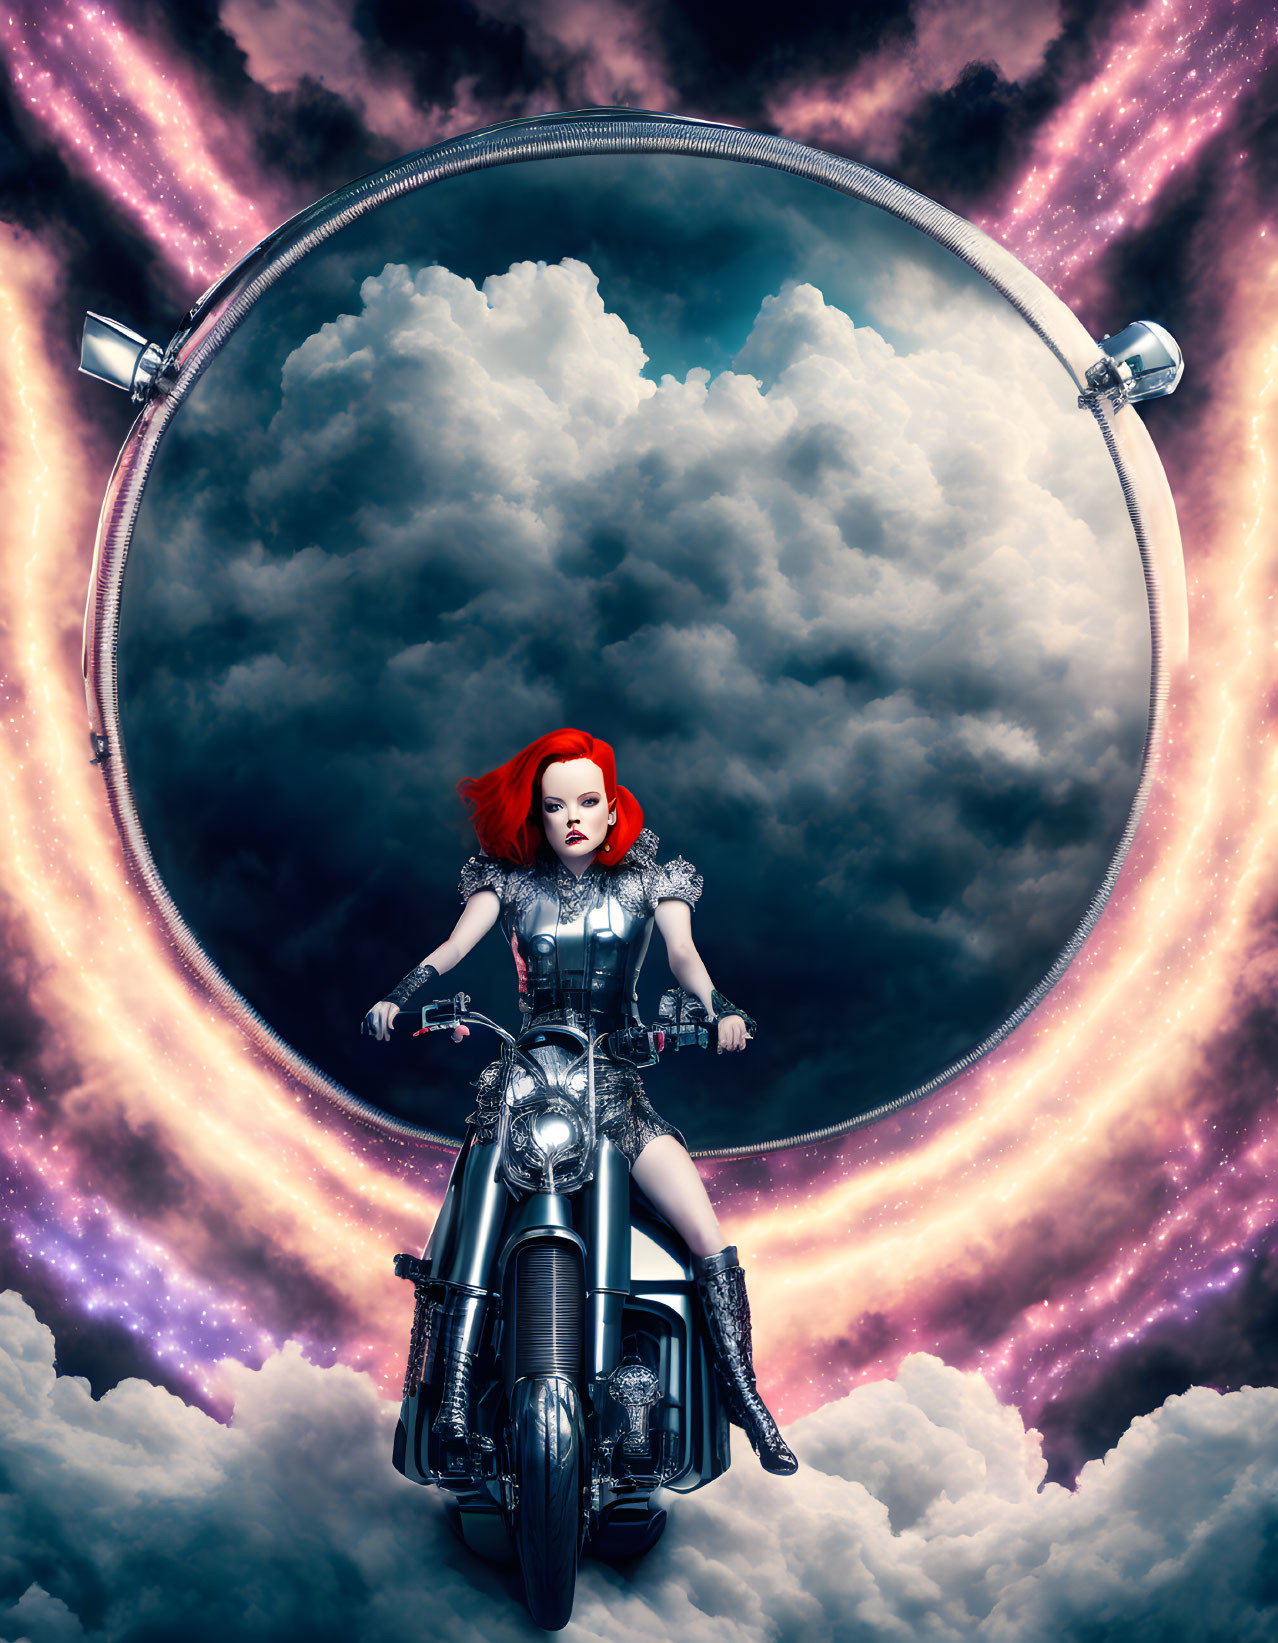 Vibrant red-haired woman on motorcycle in cosmic portal